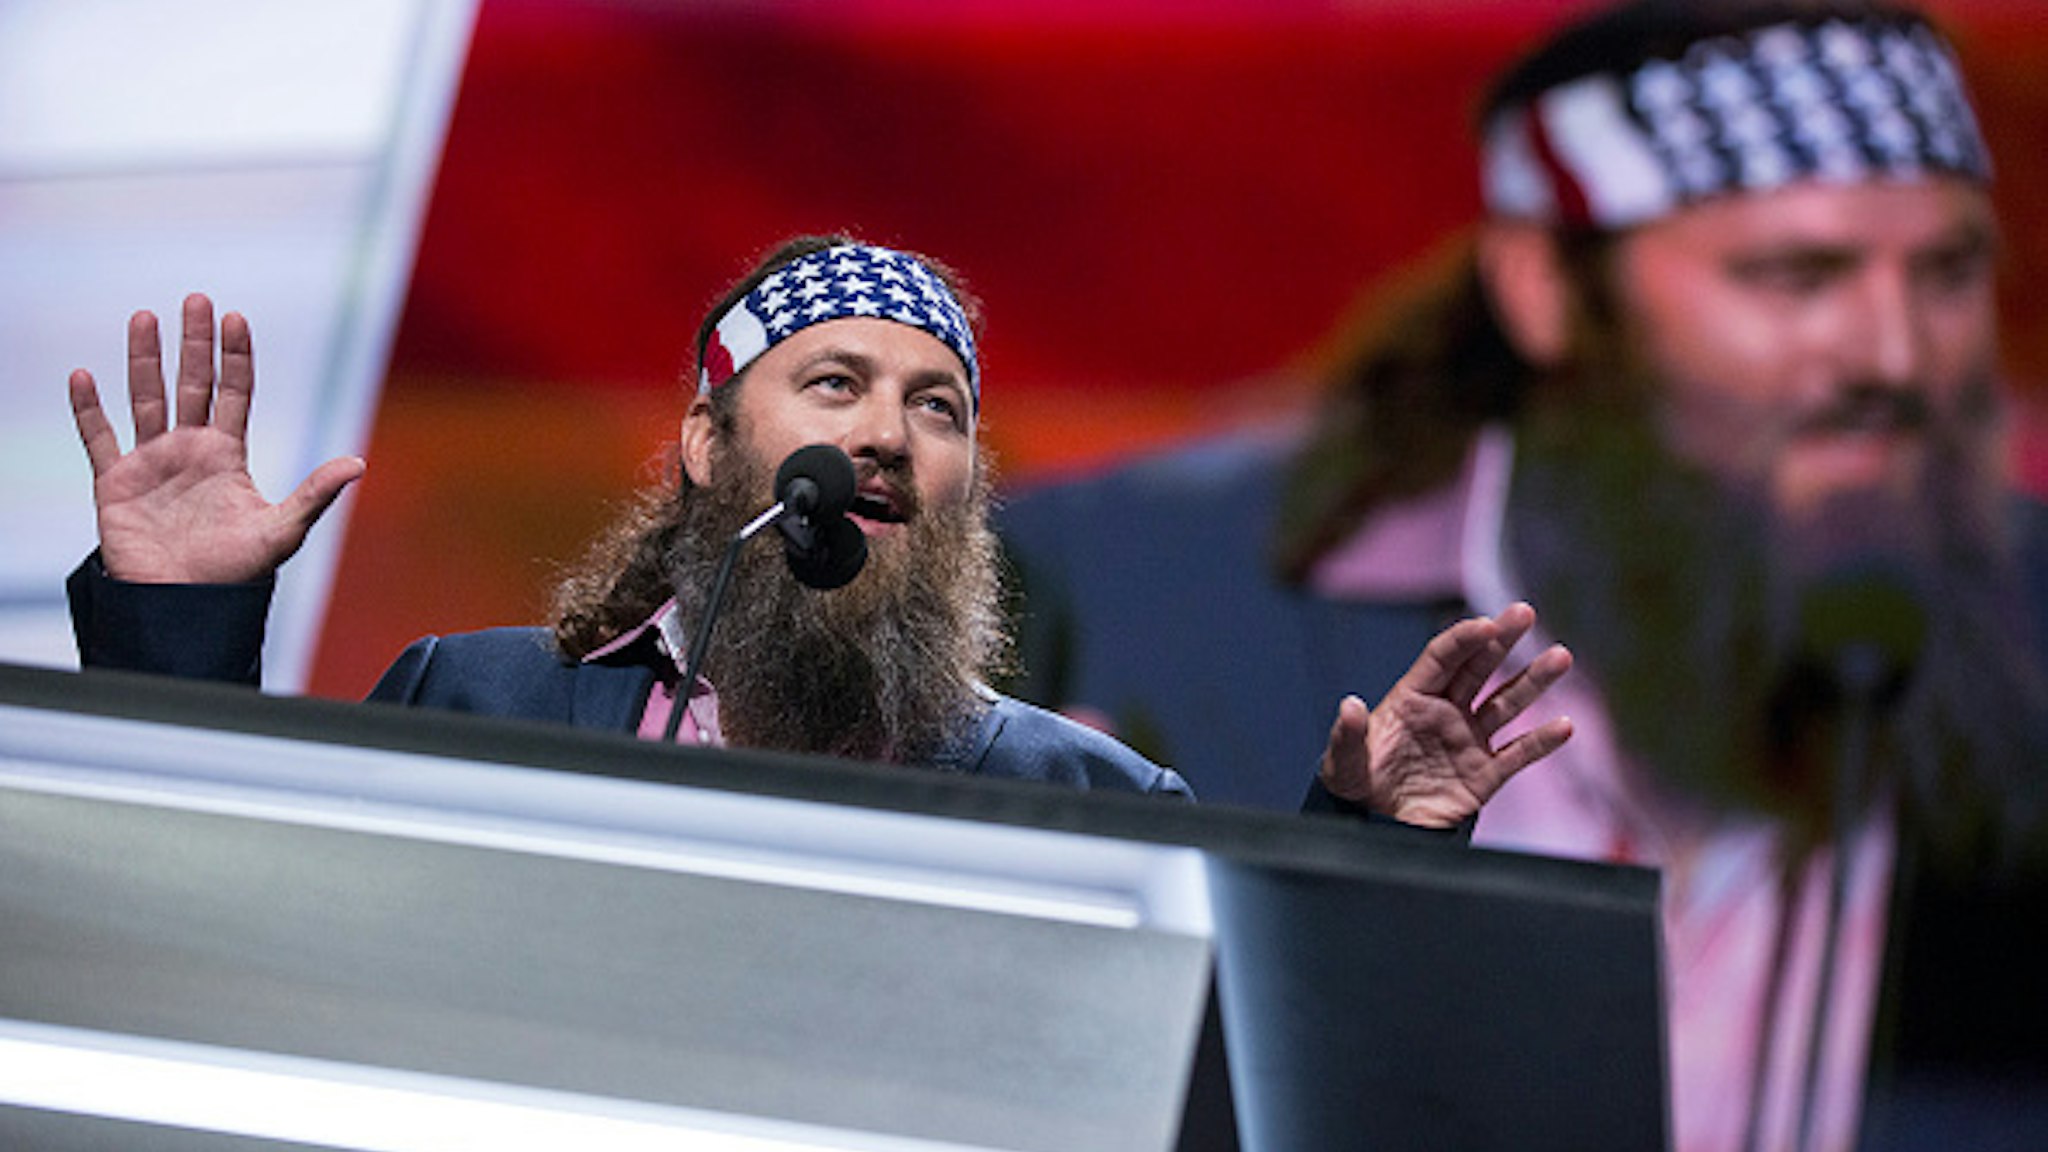 CLEVELAND, OH - JULY 18: Duck Dynasty's Willie Robertson speaks at the Republican National Convention in Cleveland, Ohio, on July 18, 2016.